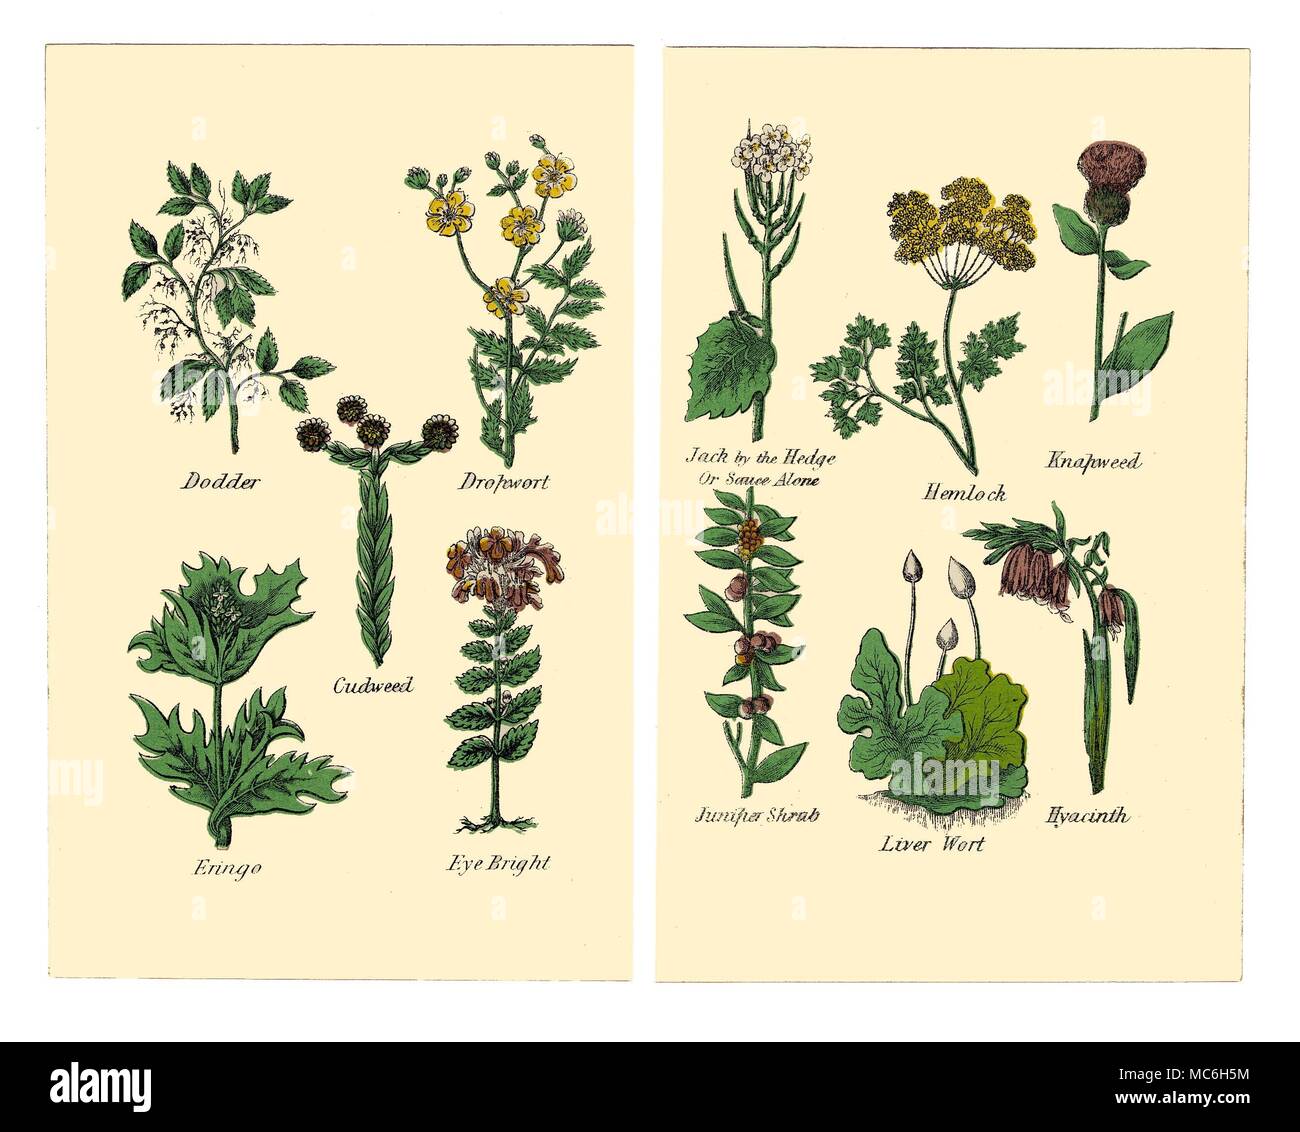 HERBS AND FLOWERS The following plants are from two plates in the 1869 Halifax edition of Matthew Robinson's The New Family Herbal. Dodder, Dropwort, Cudweed, Eringo, Bright Eye. Jack in the Hedge (or Sauce Alone), Hemlock, Knapweed, Juniper Shrub, Liver Wort, Hyacinth. Stock Photo